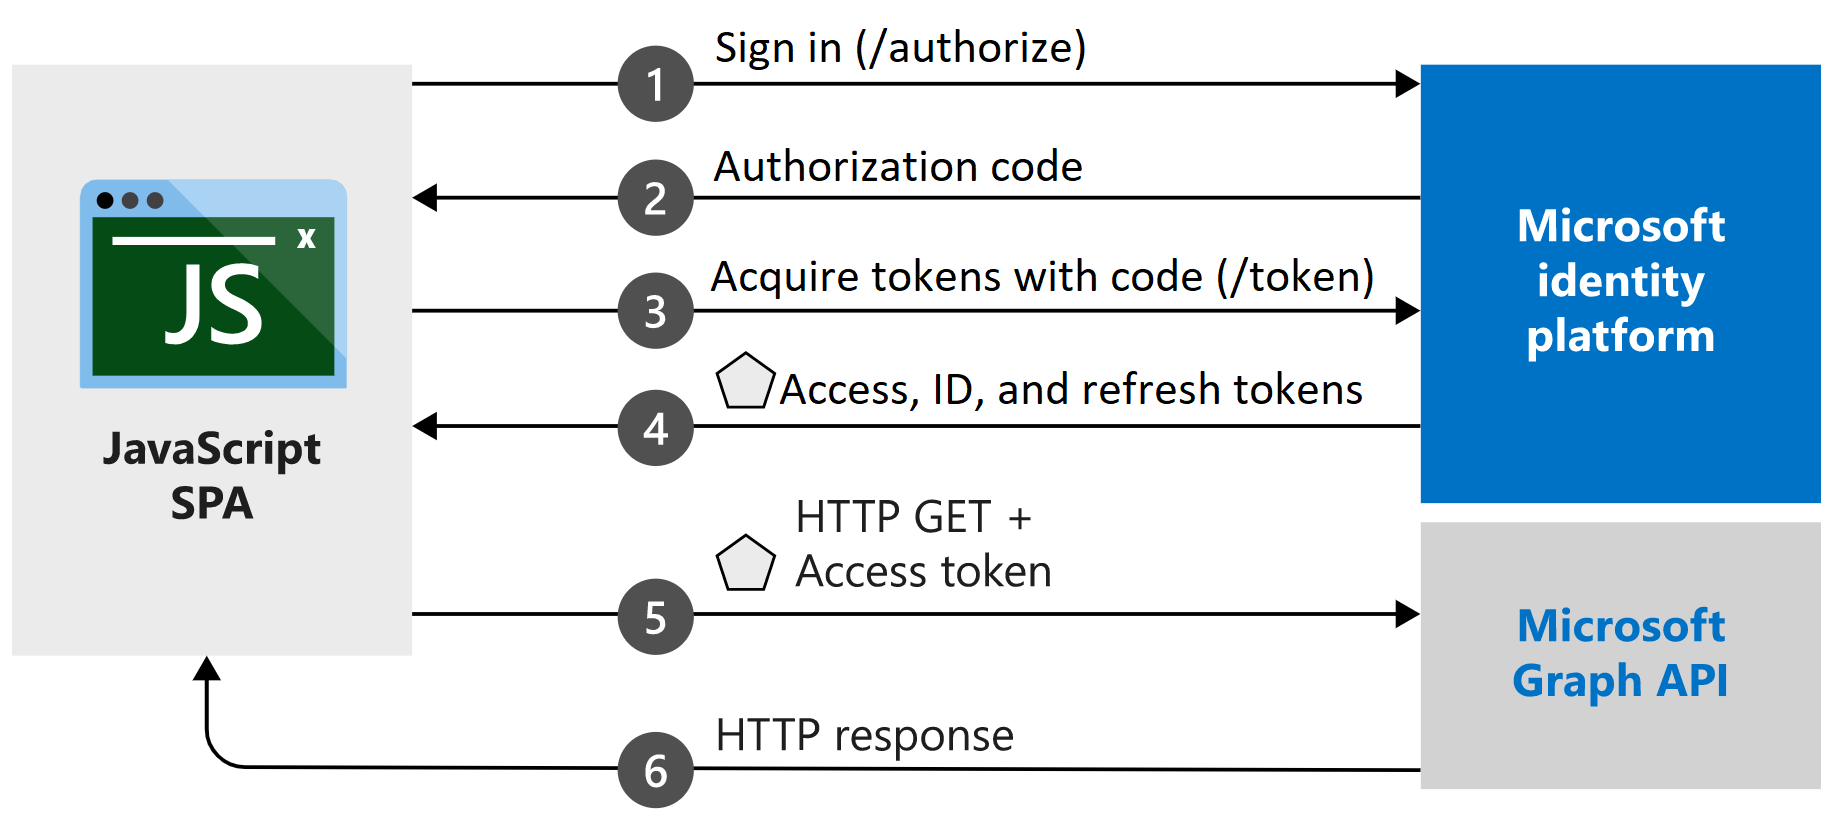 Tutorial: Create an Angular app that uses the Microsoft identity platform  for authentication using auth code flow - Microsoft Entra | Microsoft Learn